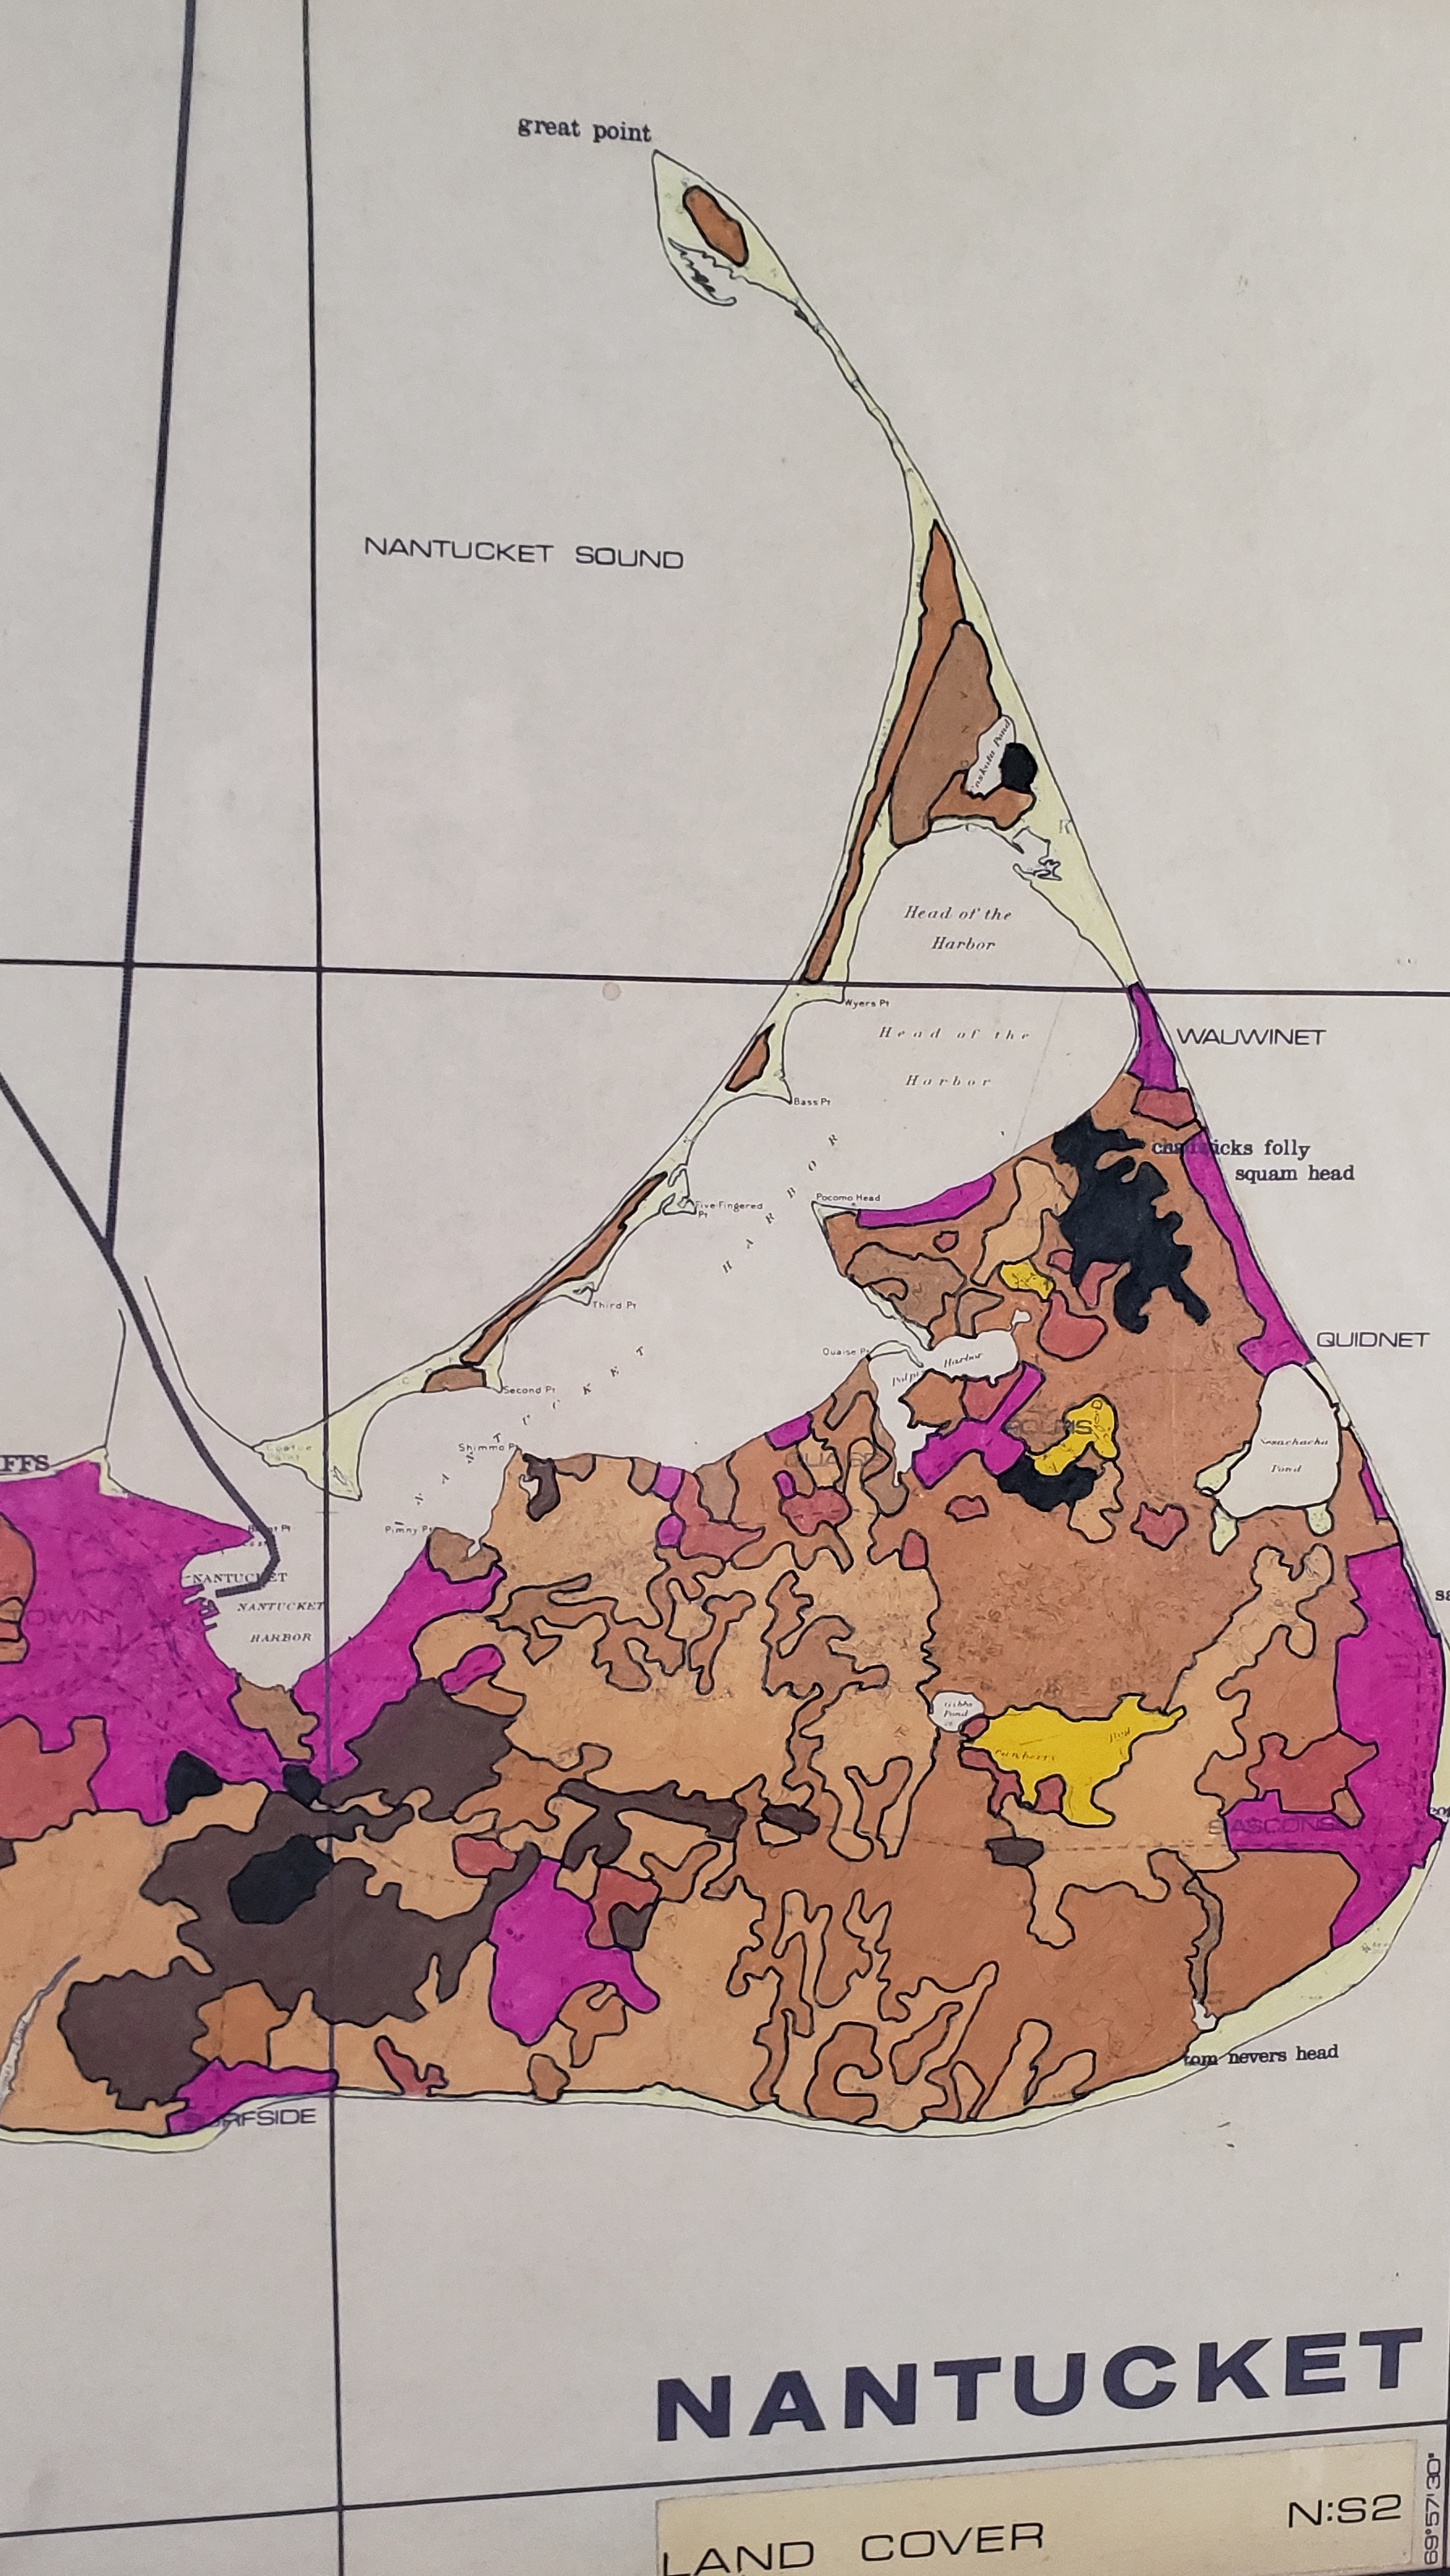 Vintage John H. Martin Colored, “Land Cover”, Map of Nantucket